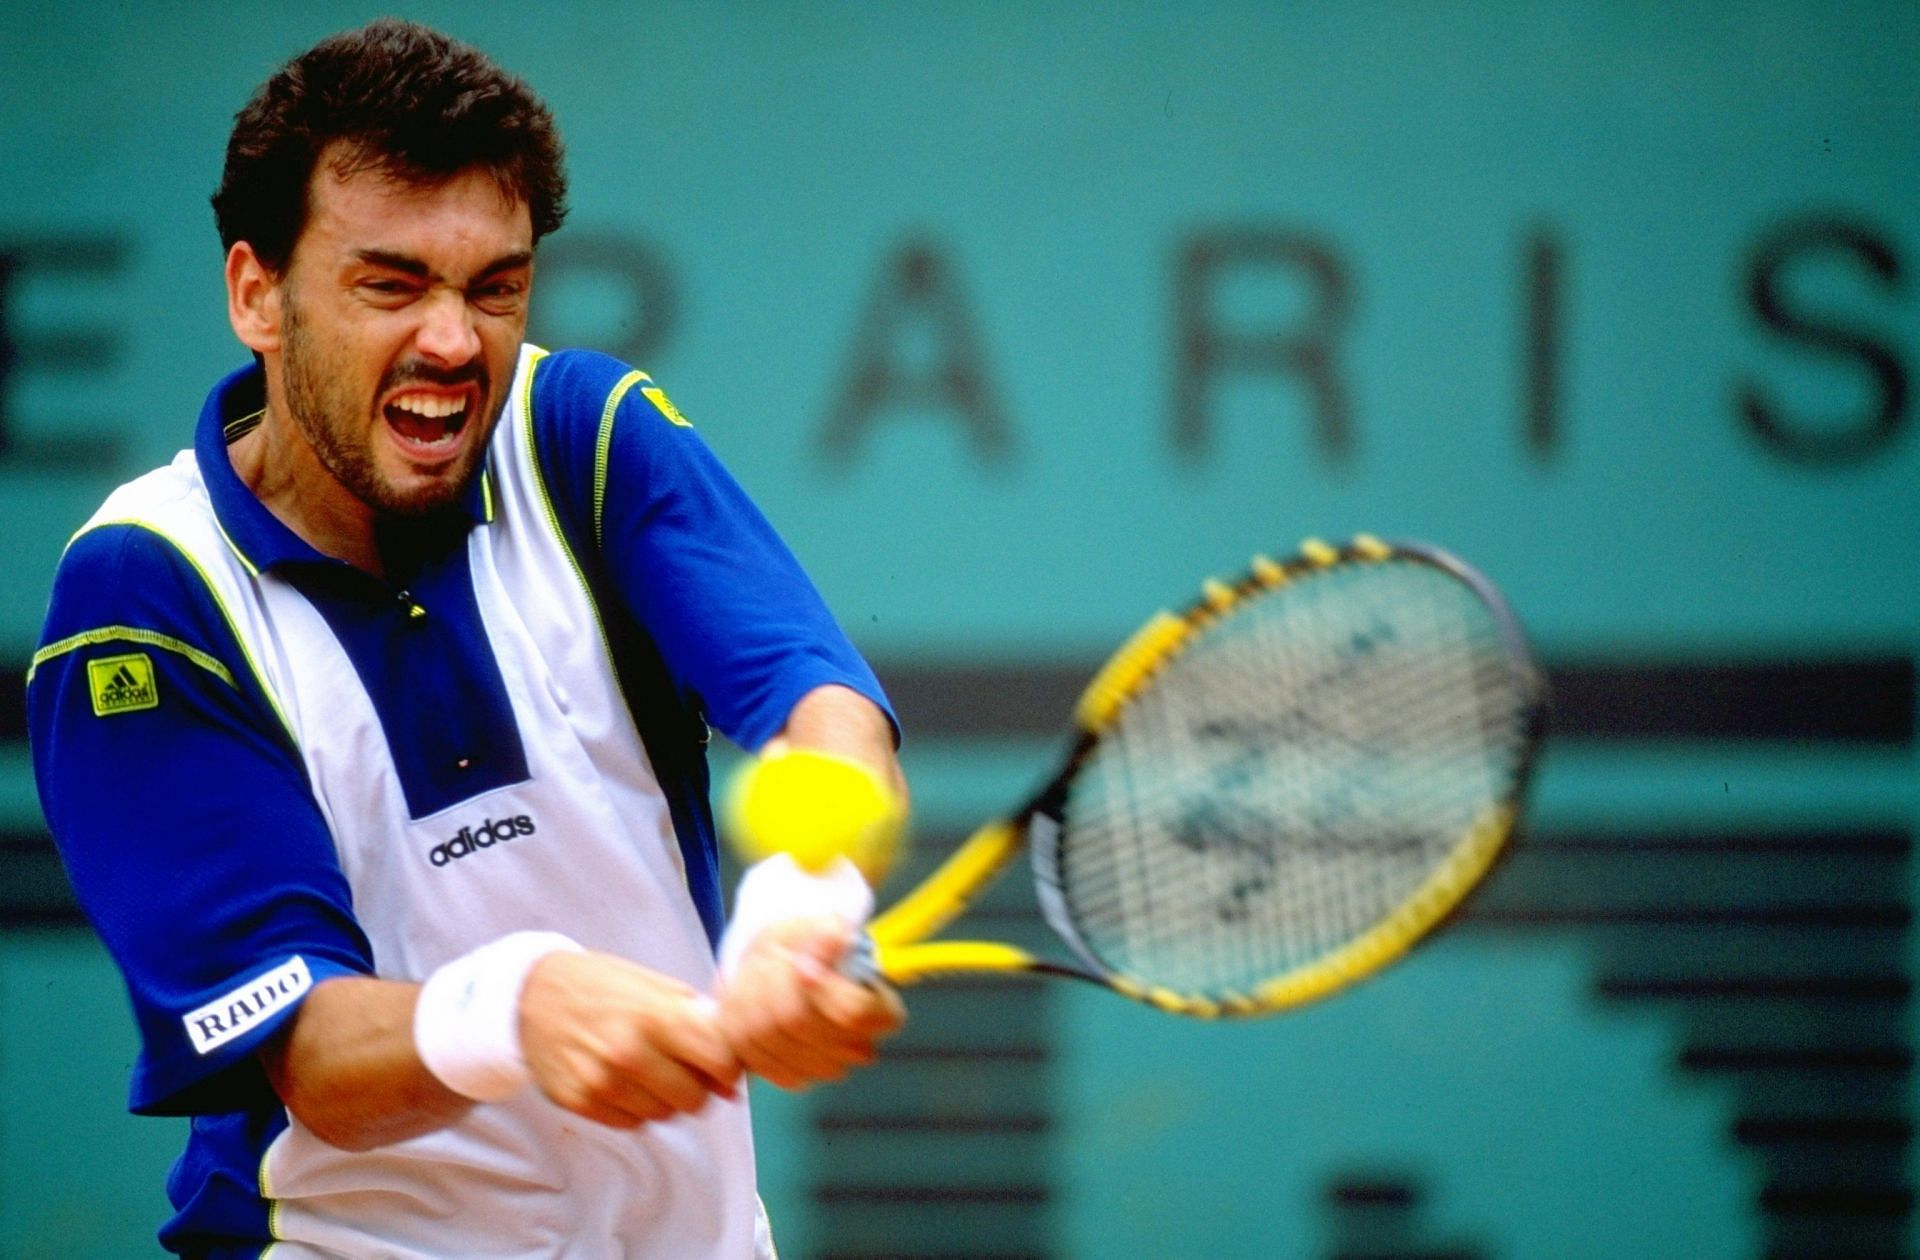 Sergi Bruguera is a two-time French Open winner.